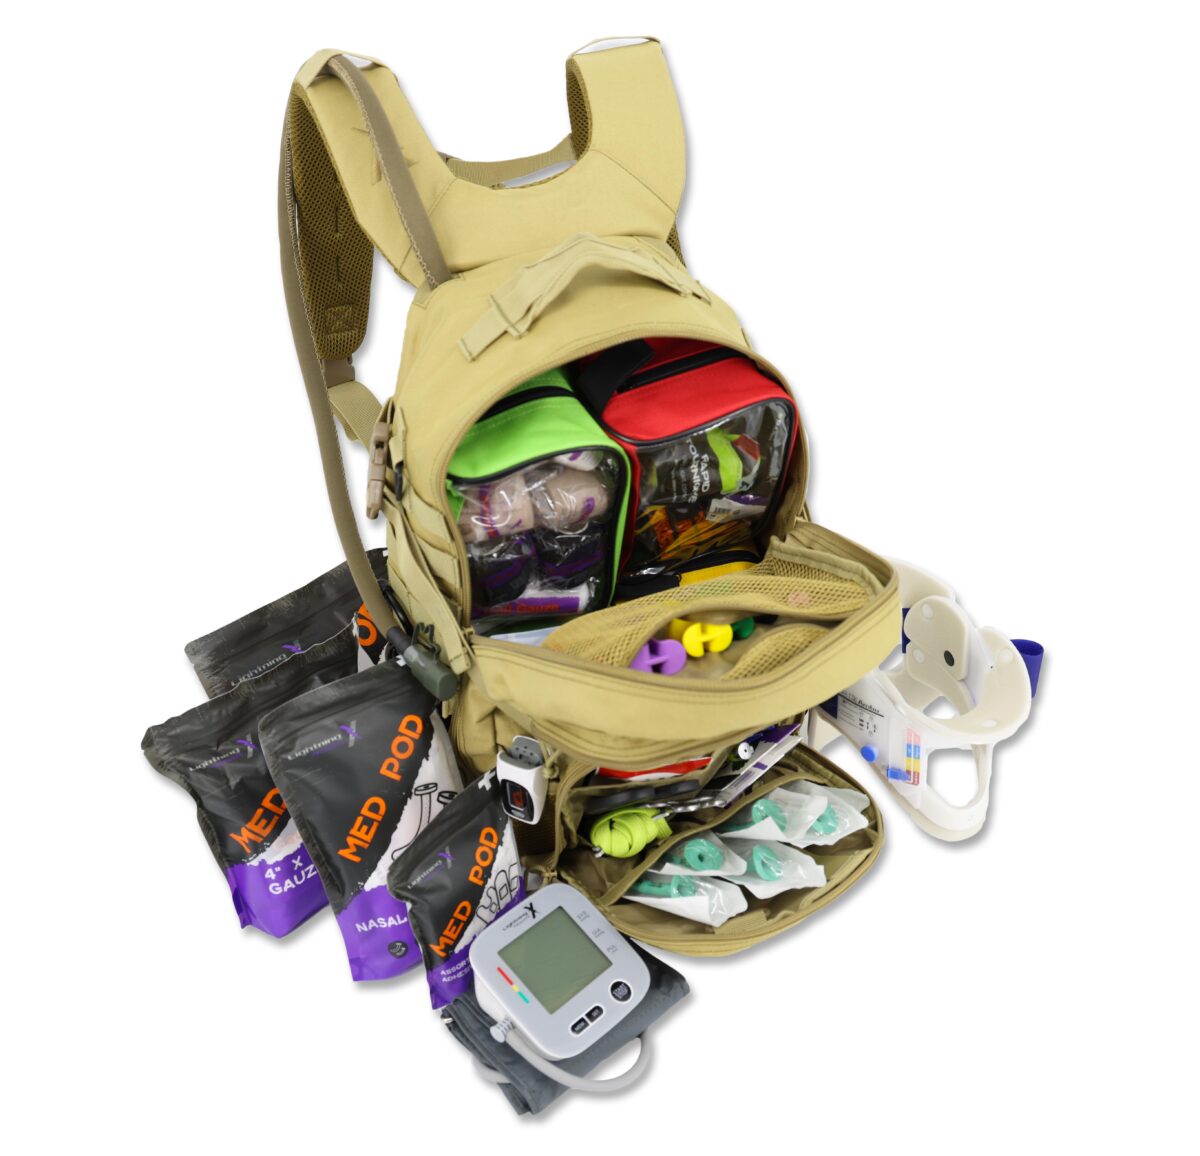 Lightning X premium tacmed molle trauma backpack kit fully stocked gear bag for ems emt first responder w/ first aid supplies including quikclot, tourniquet, israeli bandage, nasal airways and professional medical supplies with removable colored organizer pouches and hydration bladder - TAN